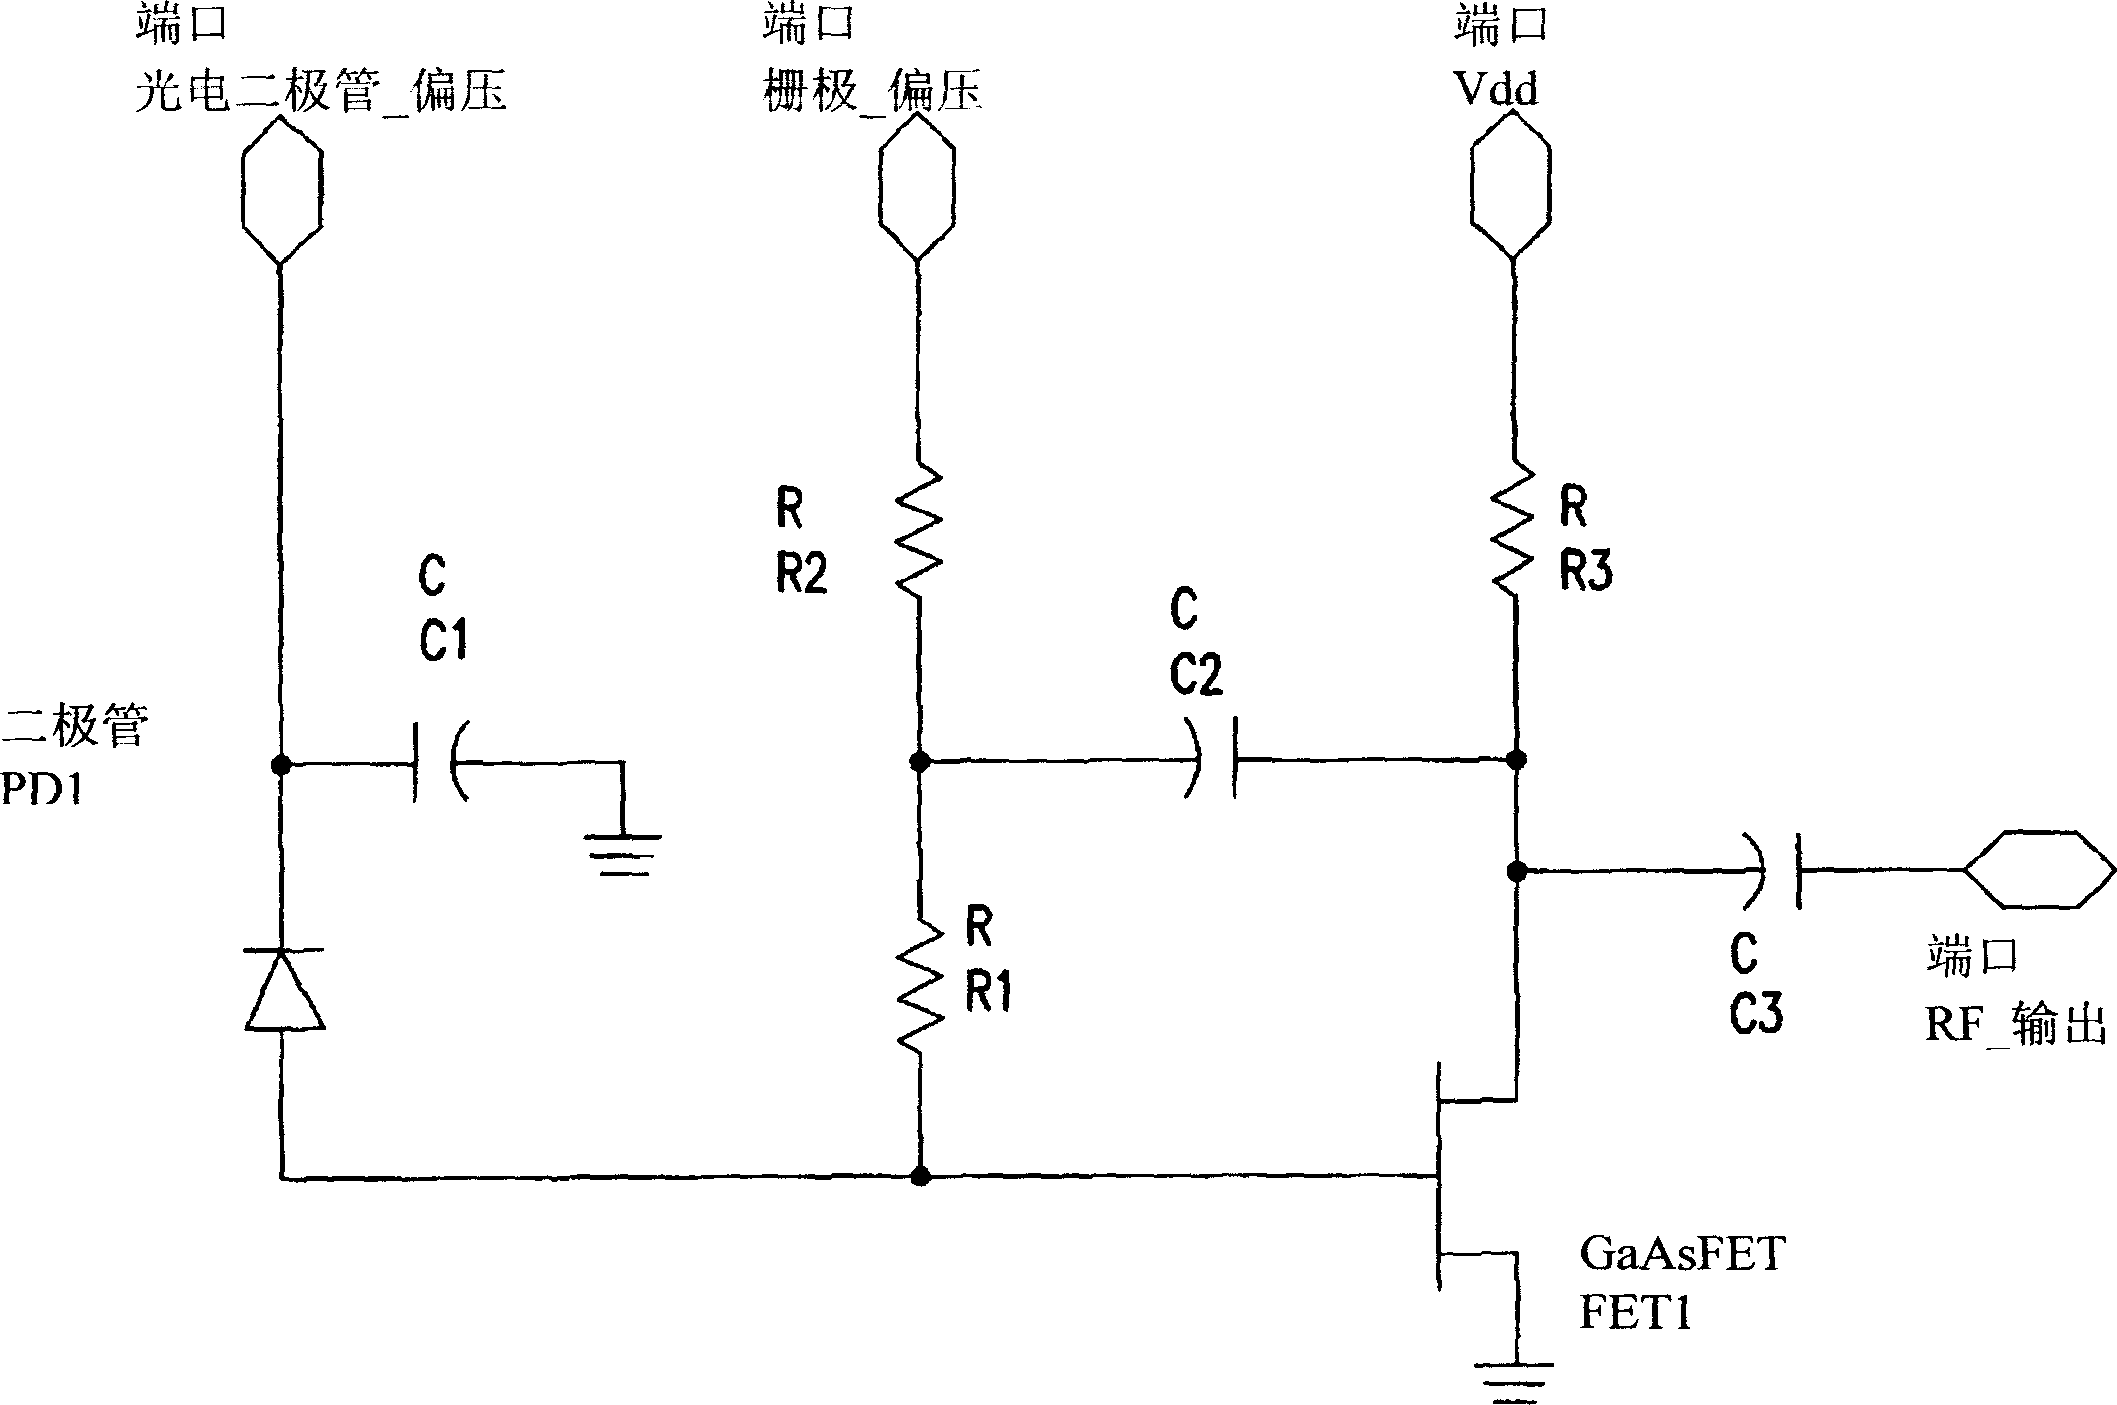 Distortion cancellation in a transimpedance amplifier circuit